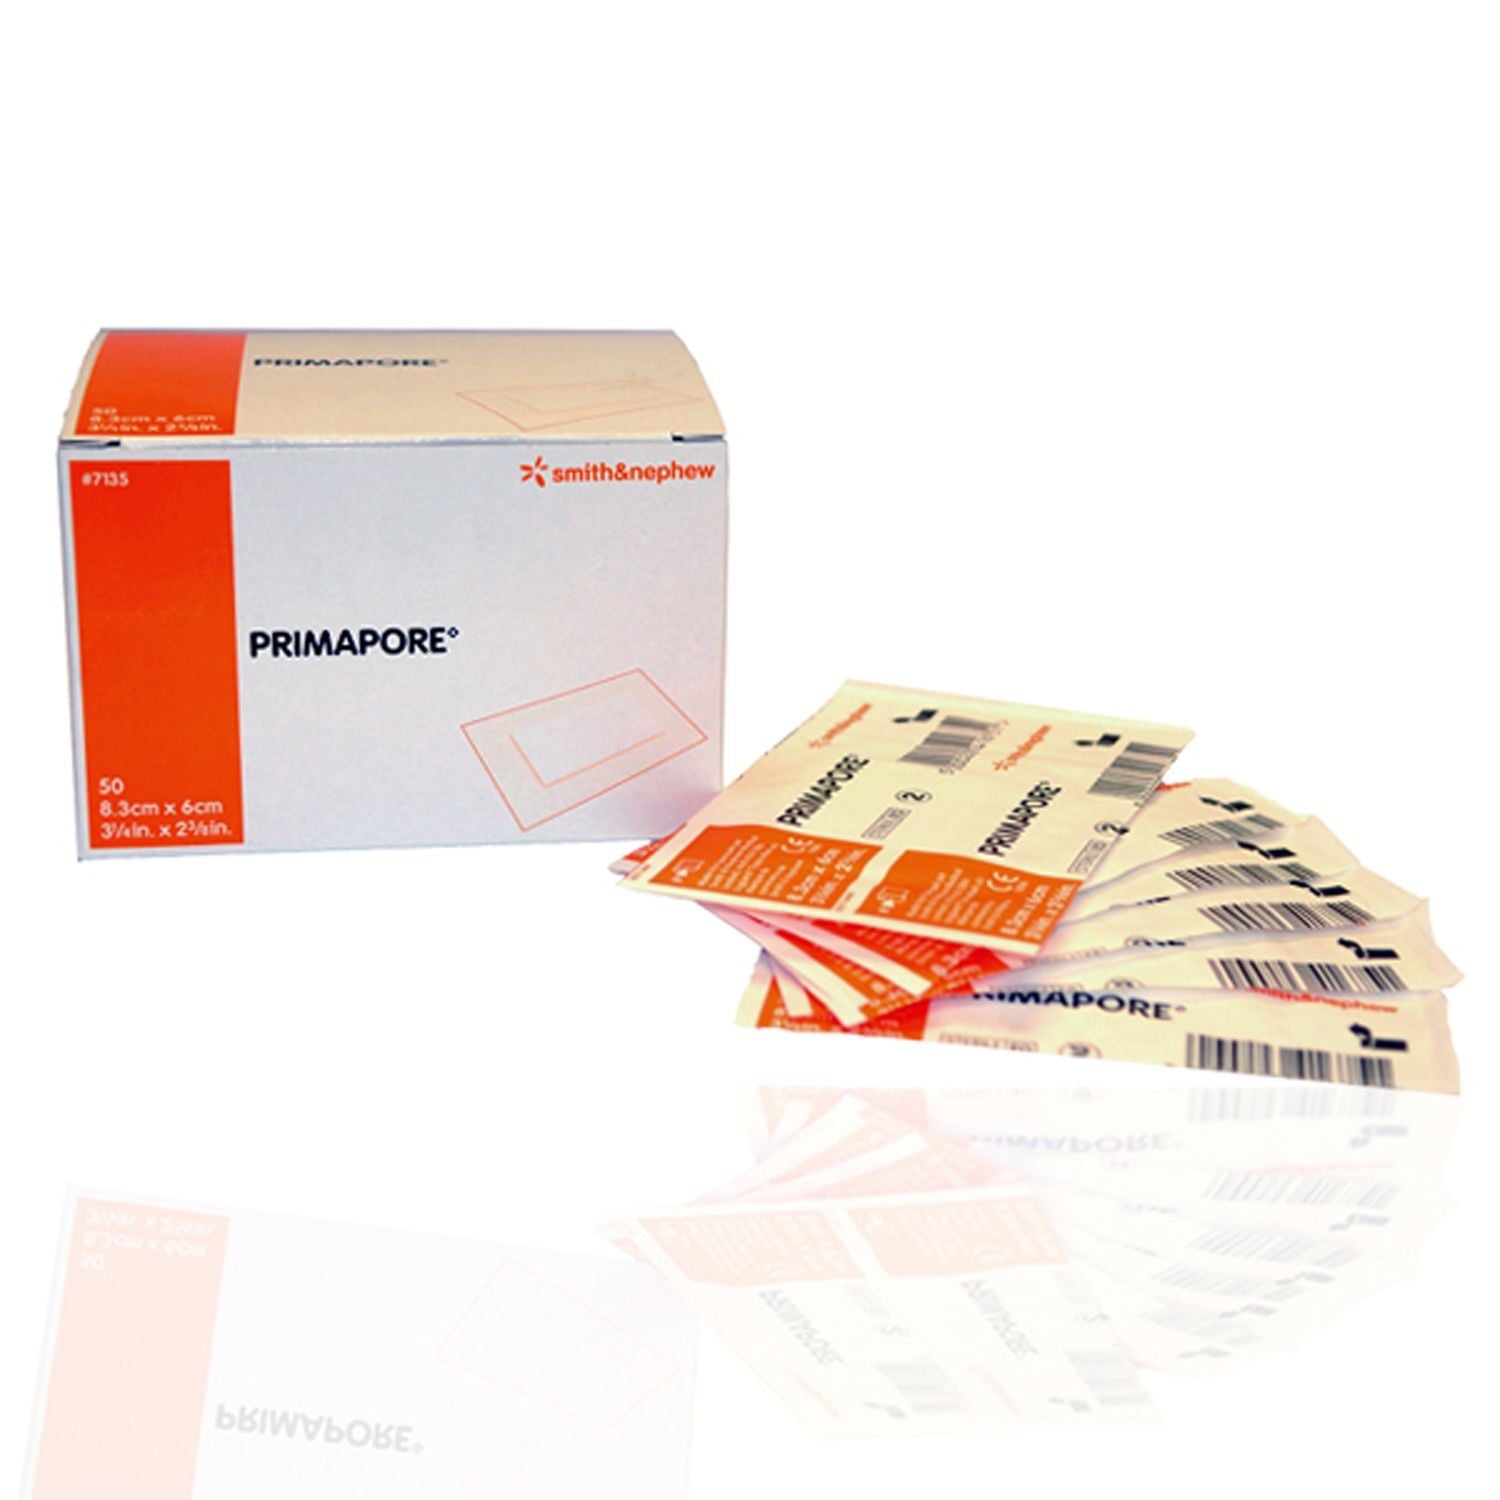 Primapore Adhesive Wound Dressing | 8.3 x 6cm | Pack of 50